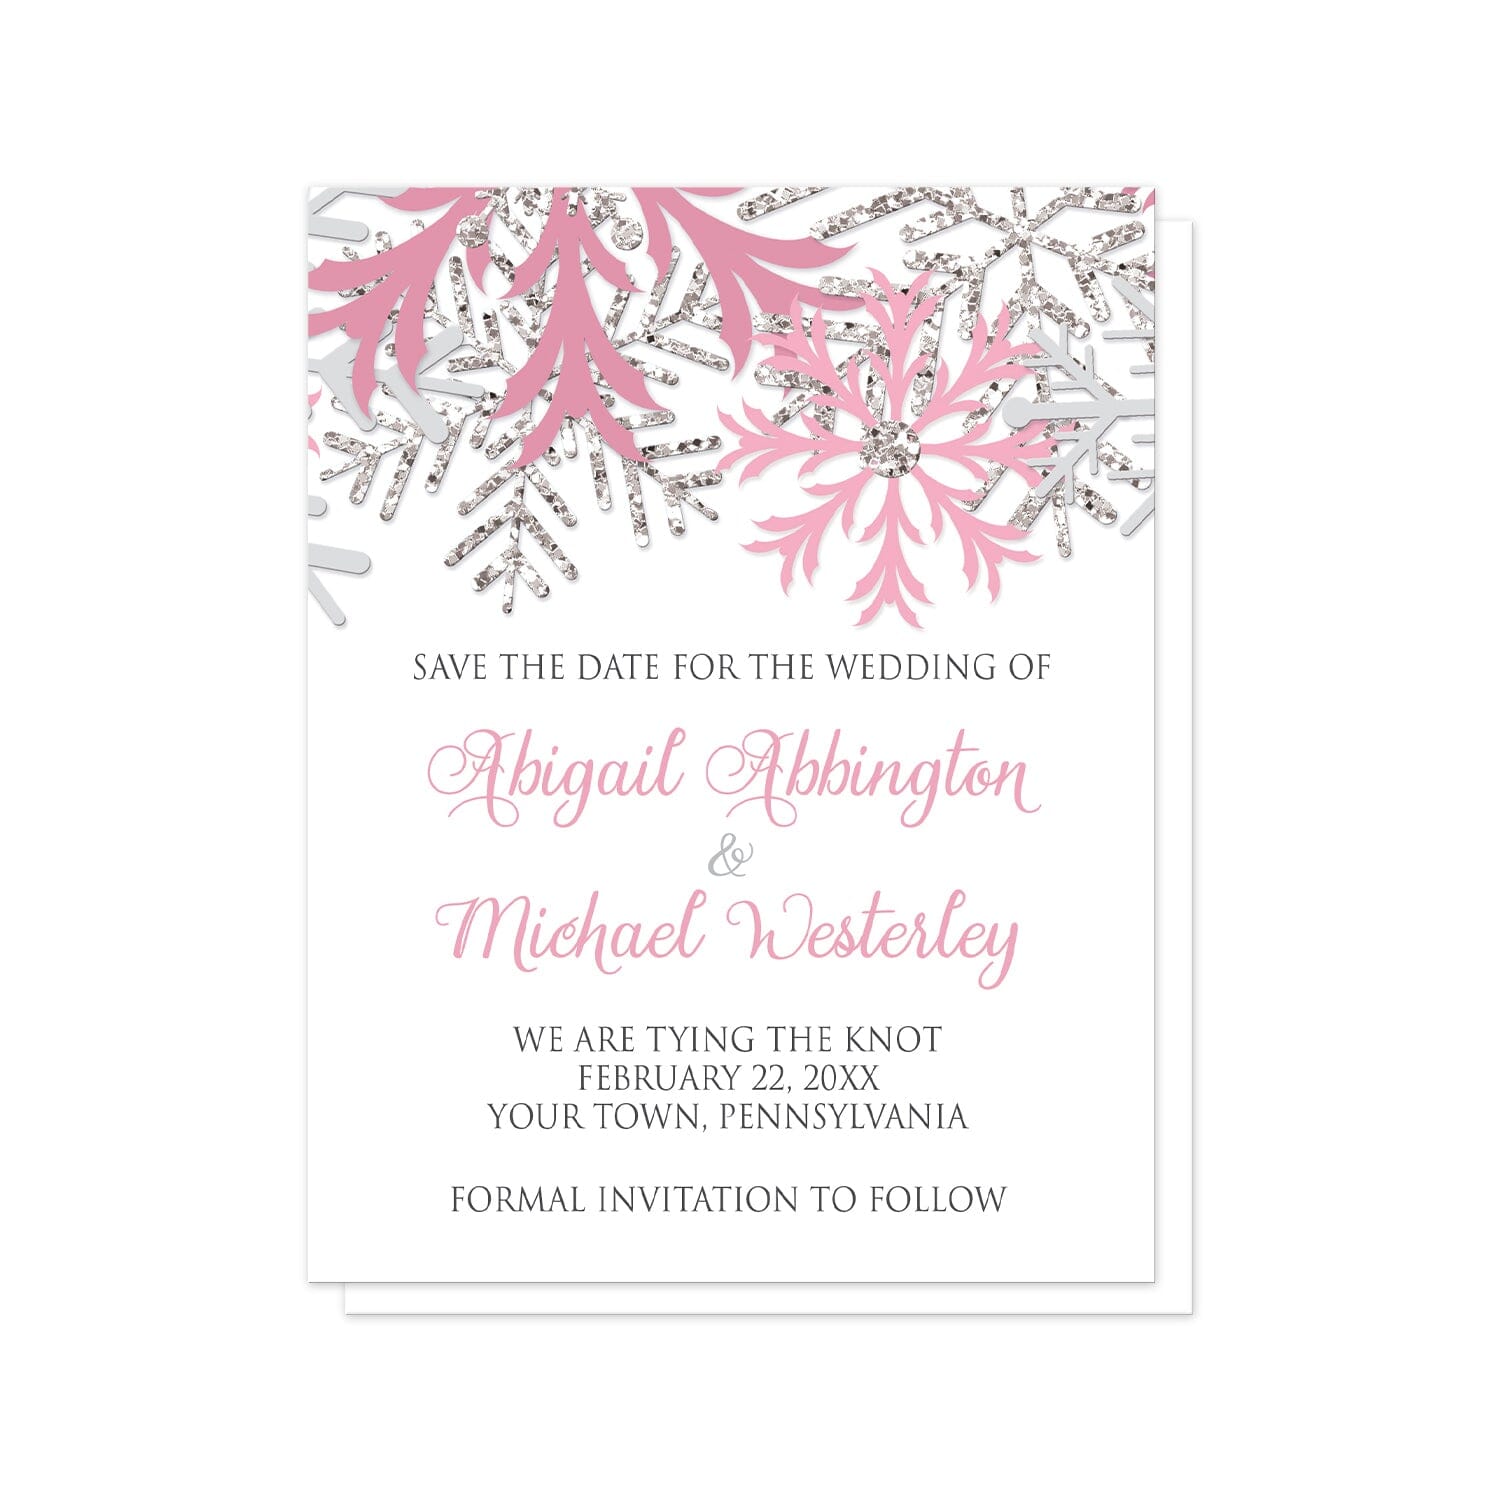 Winter Pink Silver Snowflake Save the Date Cards at Artistically Invited. Beautiful winter pink silver snowflake save the date cards designed with pink, light pink, silver-colored glitter-illustrated, and light gray snowflakes along the top over a white background. Your personalized wedding date details are custom printed in pink and gray below the pretty snowflakes.